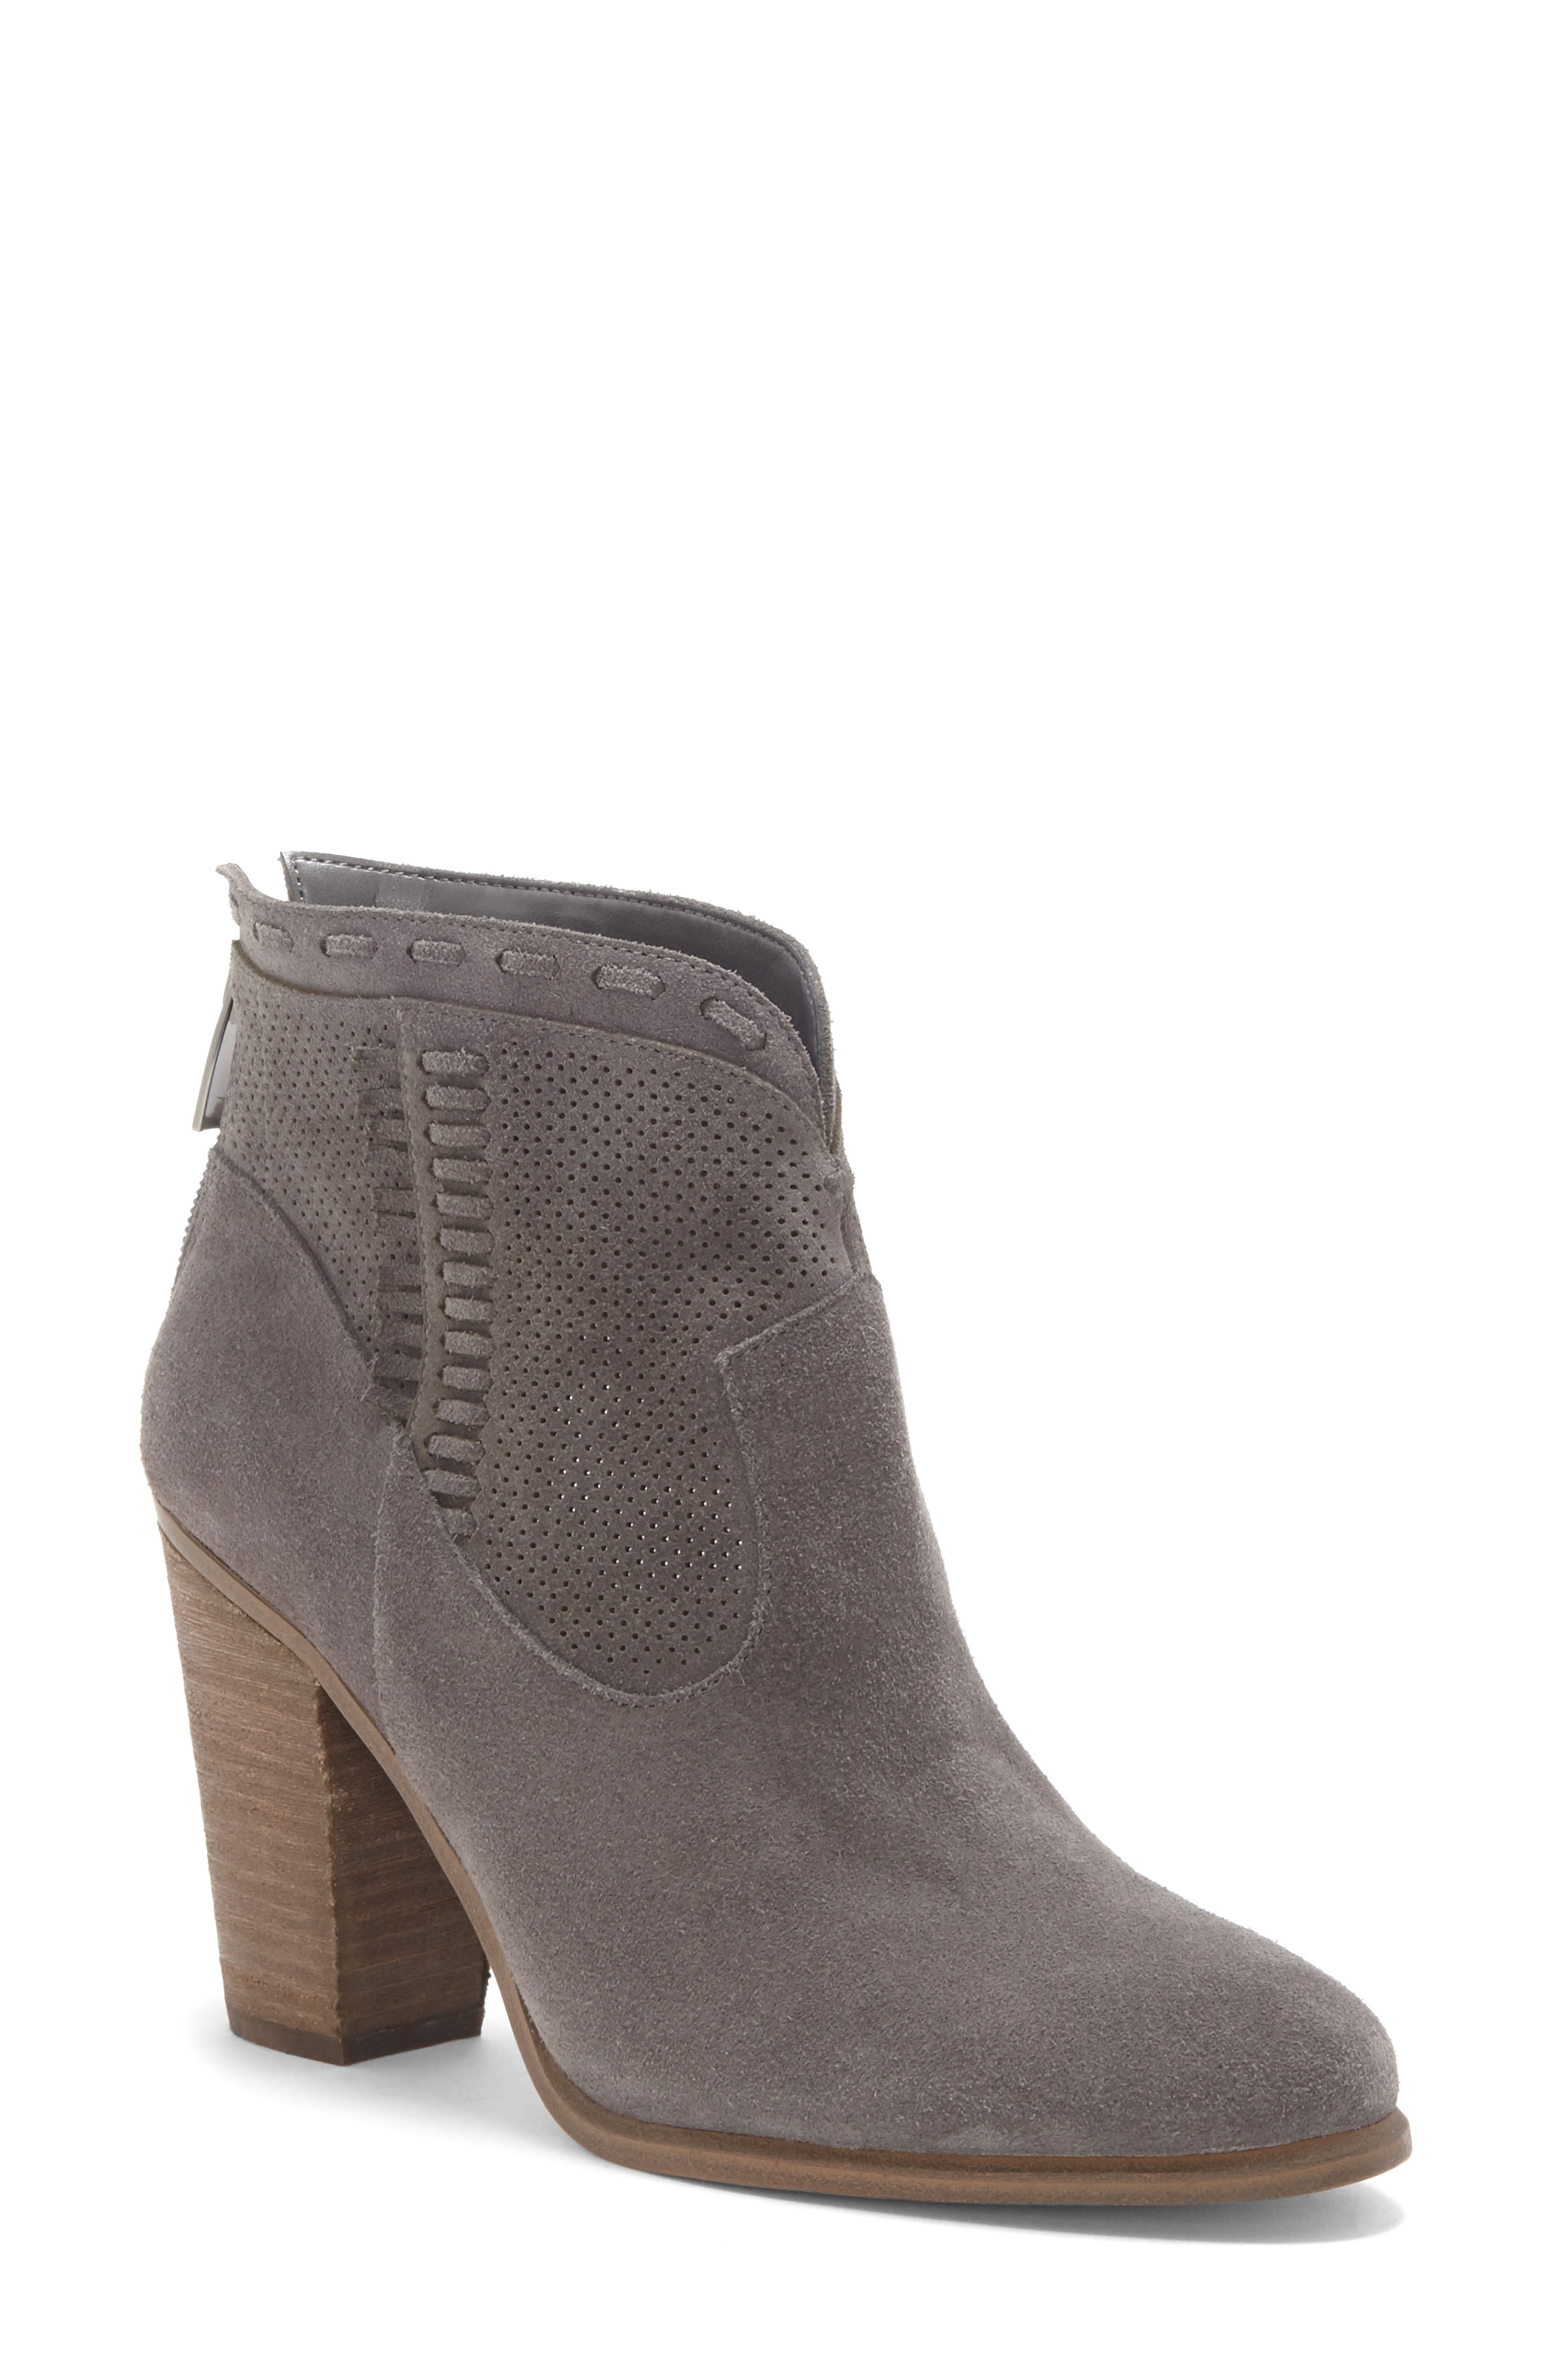 Vince Camuto Fretzia Perforated Boot (Women)